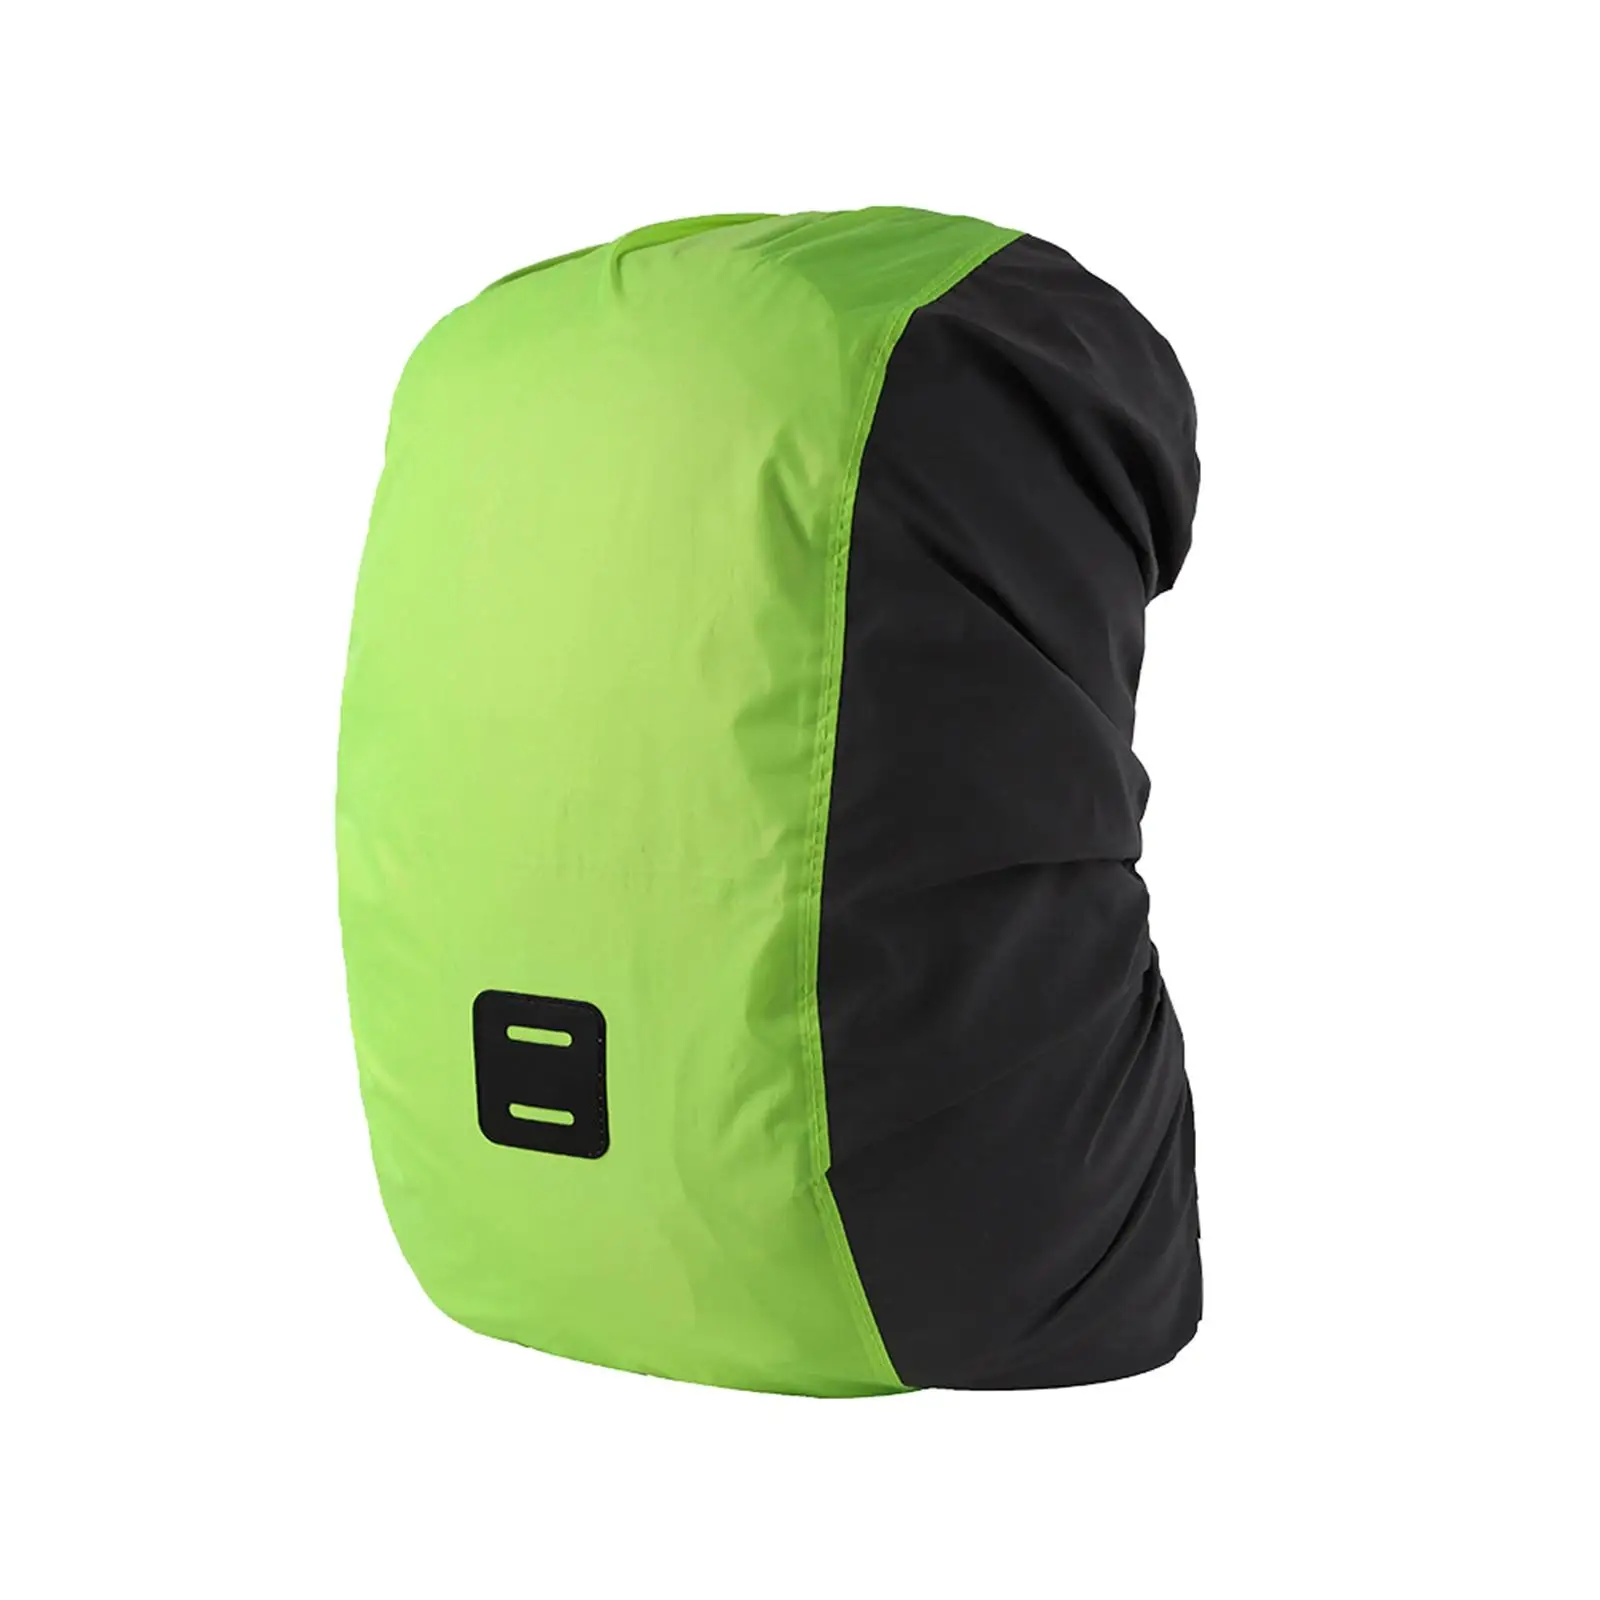 Reflective Backpack Rain Cover Climbing Travel Dustproof Case for Backpack